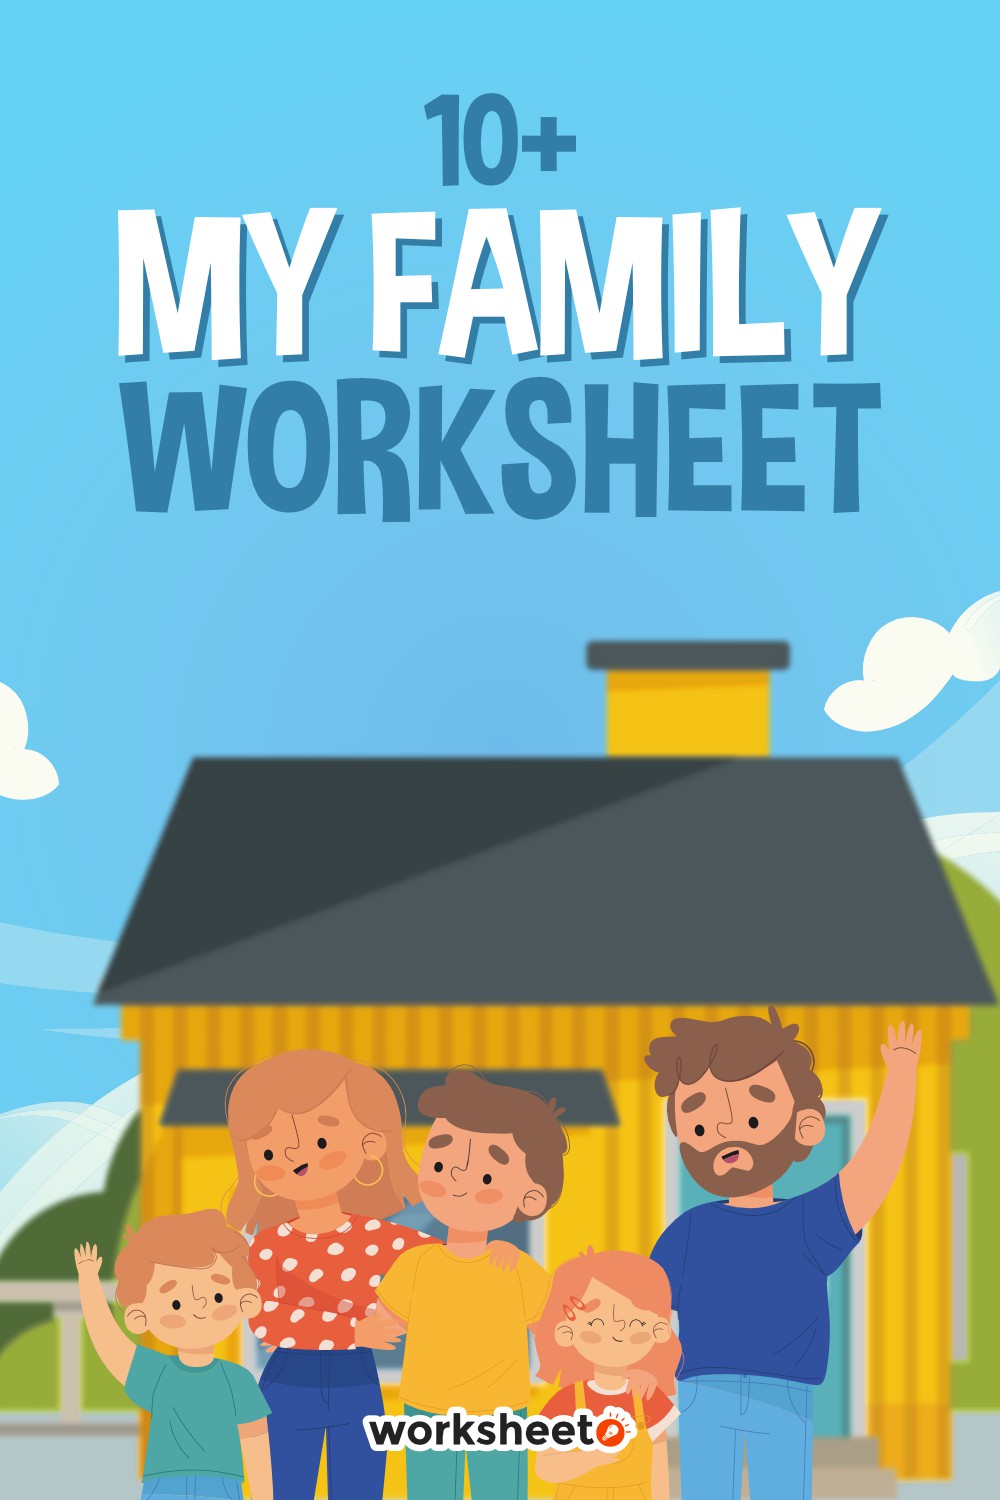 14 Images of My Family Worksheet